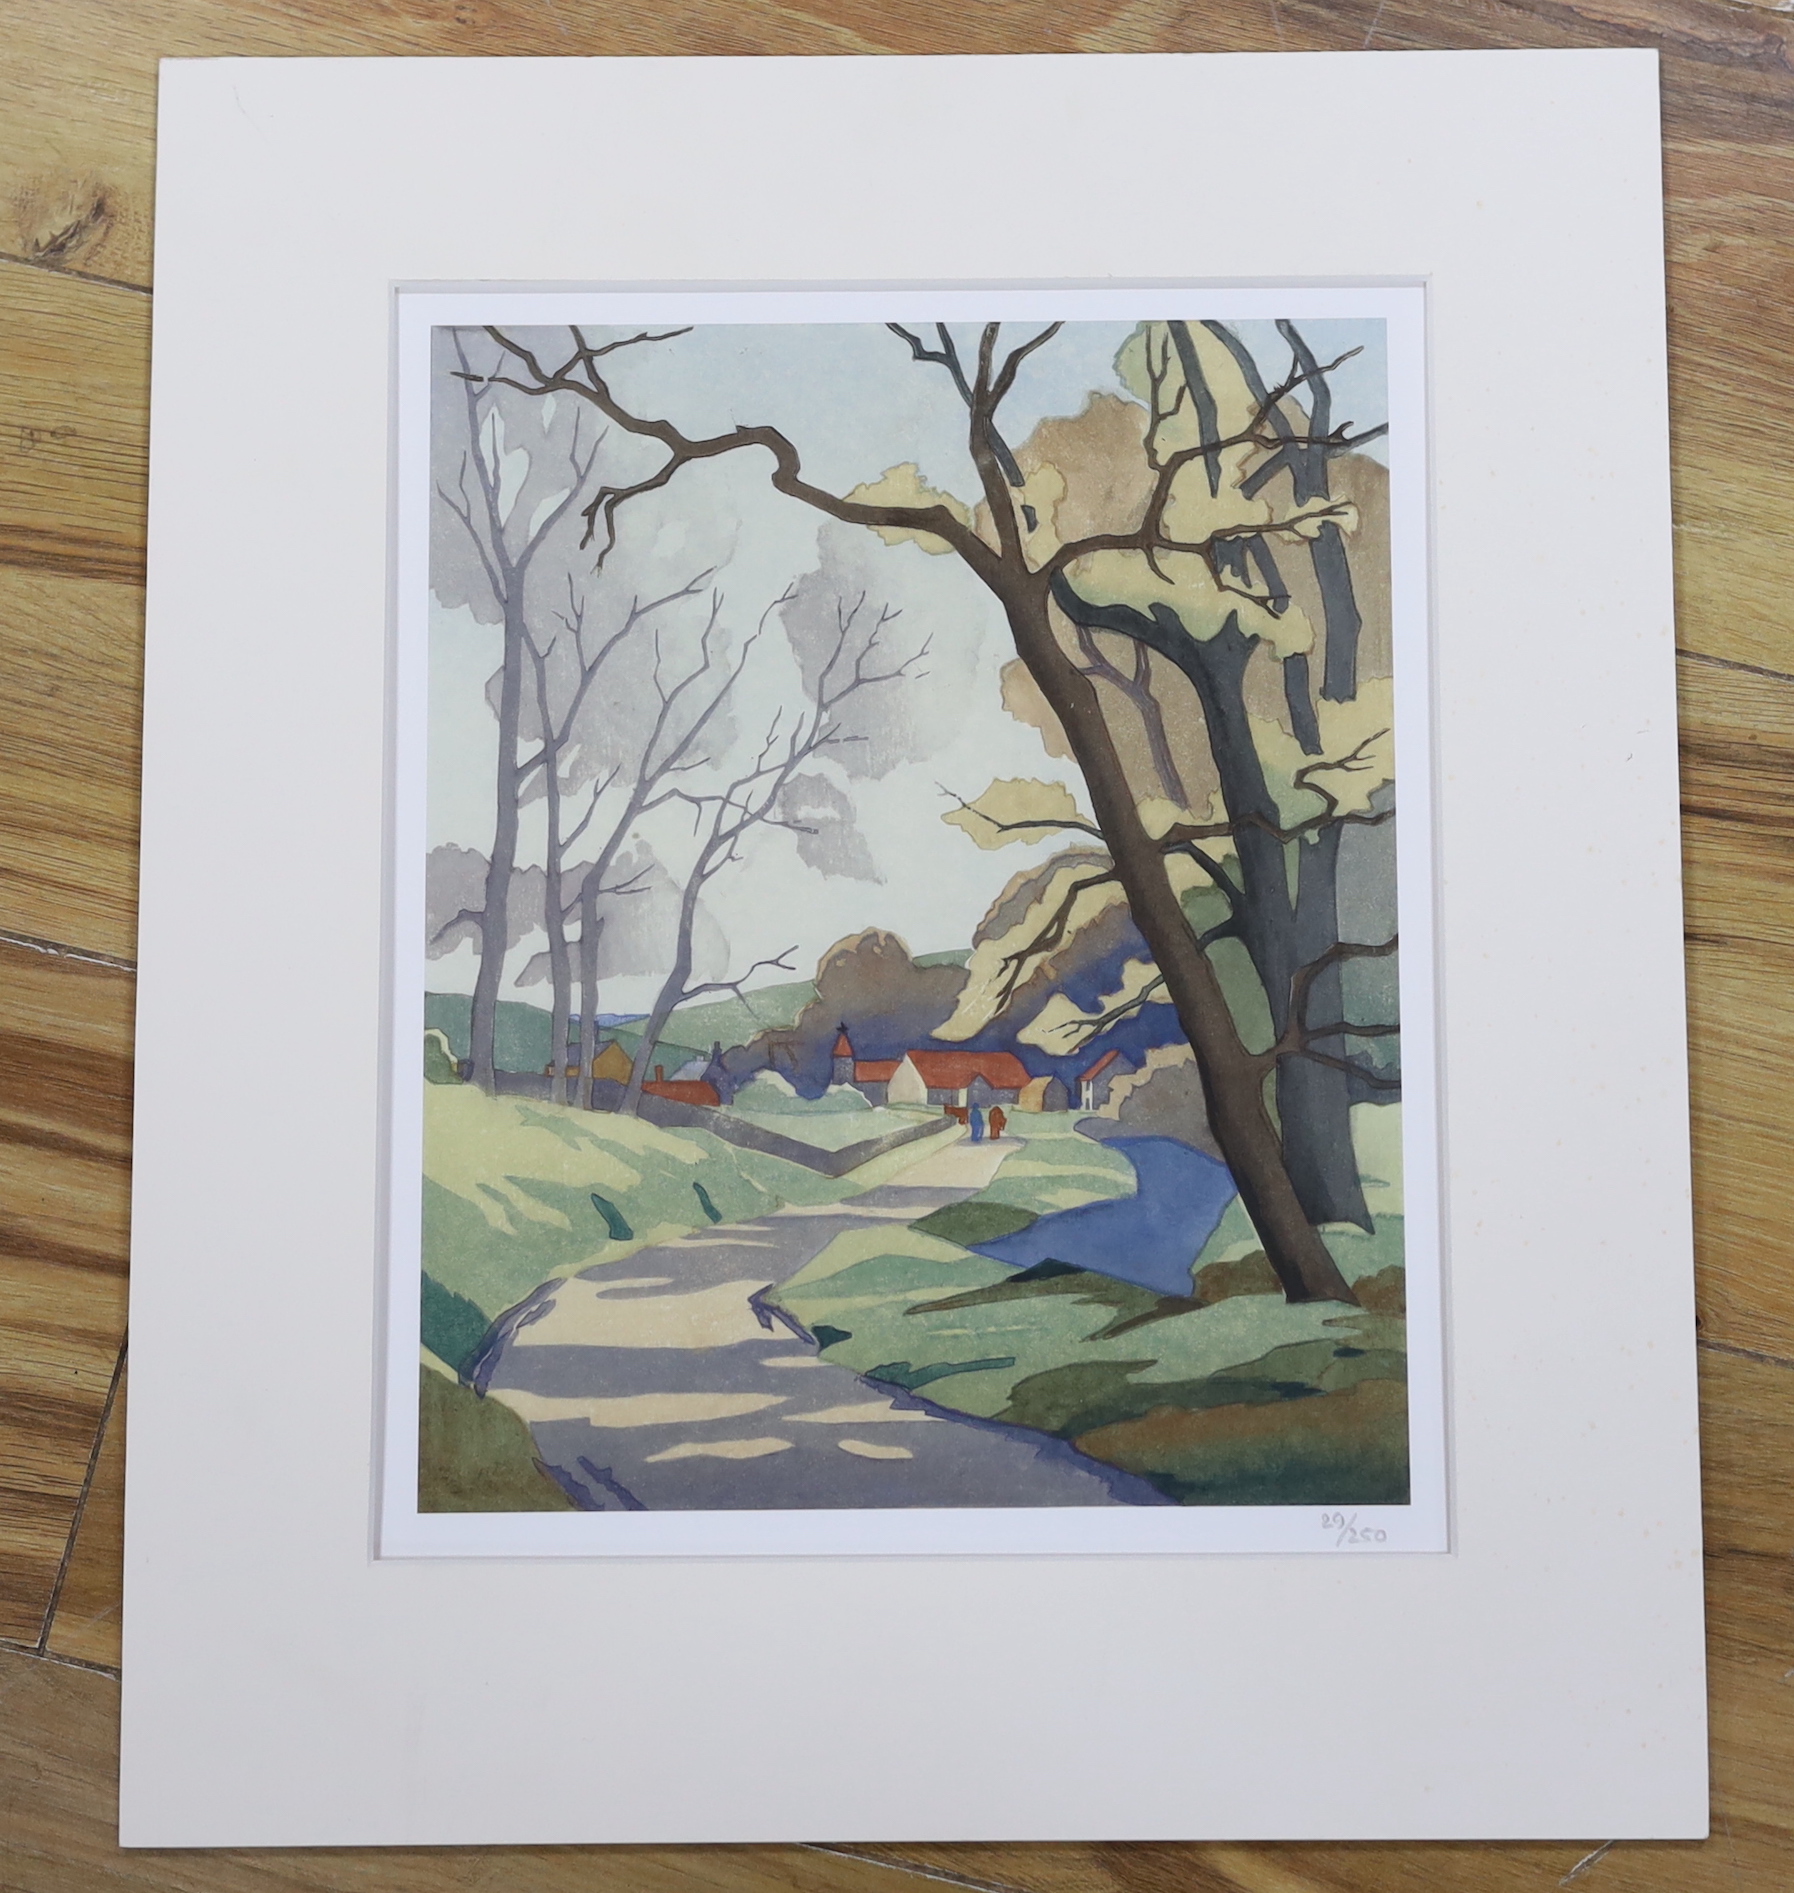 Eric Slater (British, 1896-1963), giclee print, 'Early Spring', limited edition 29/250, details and signature verso, 30 x 25cm, mounted, unframed